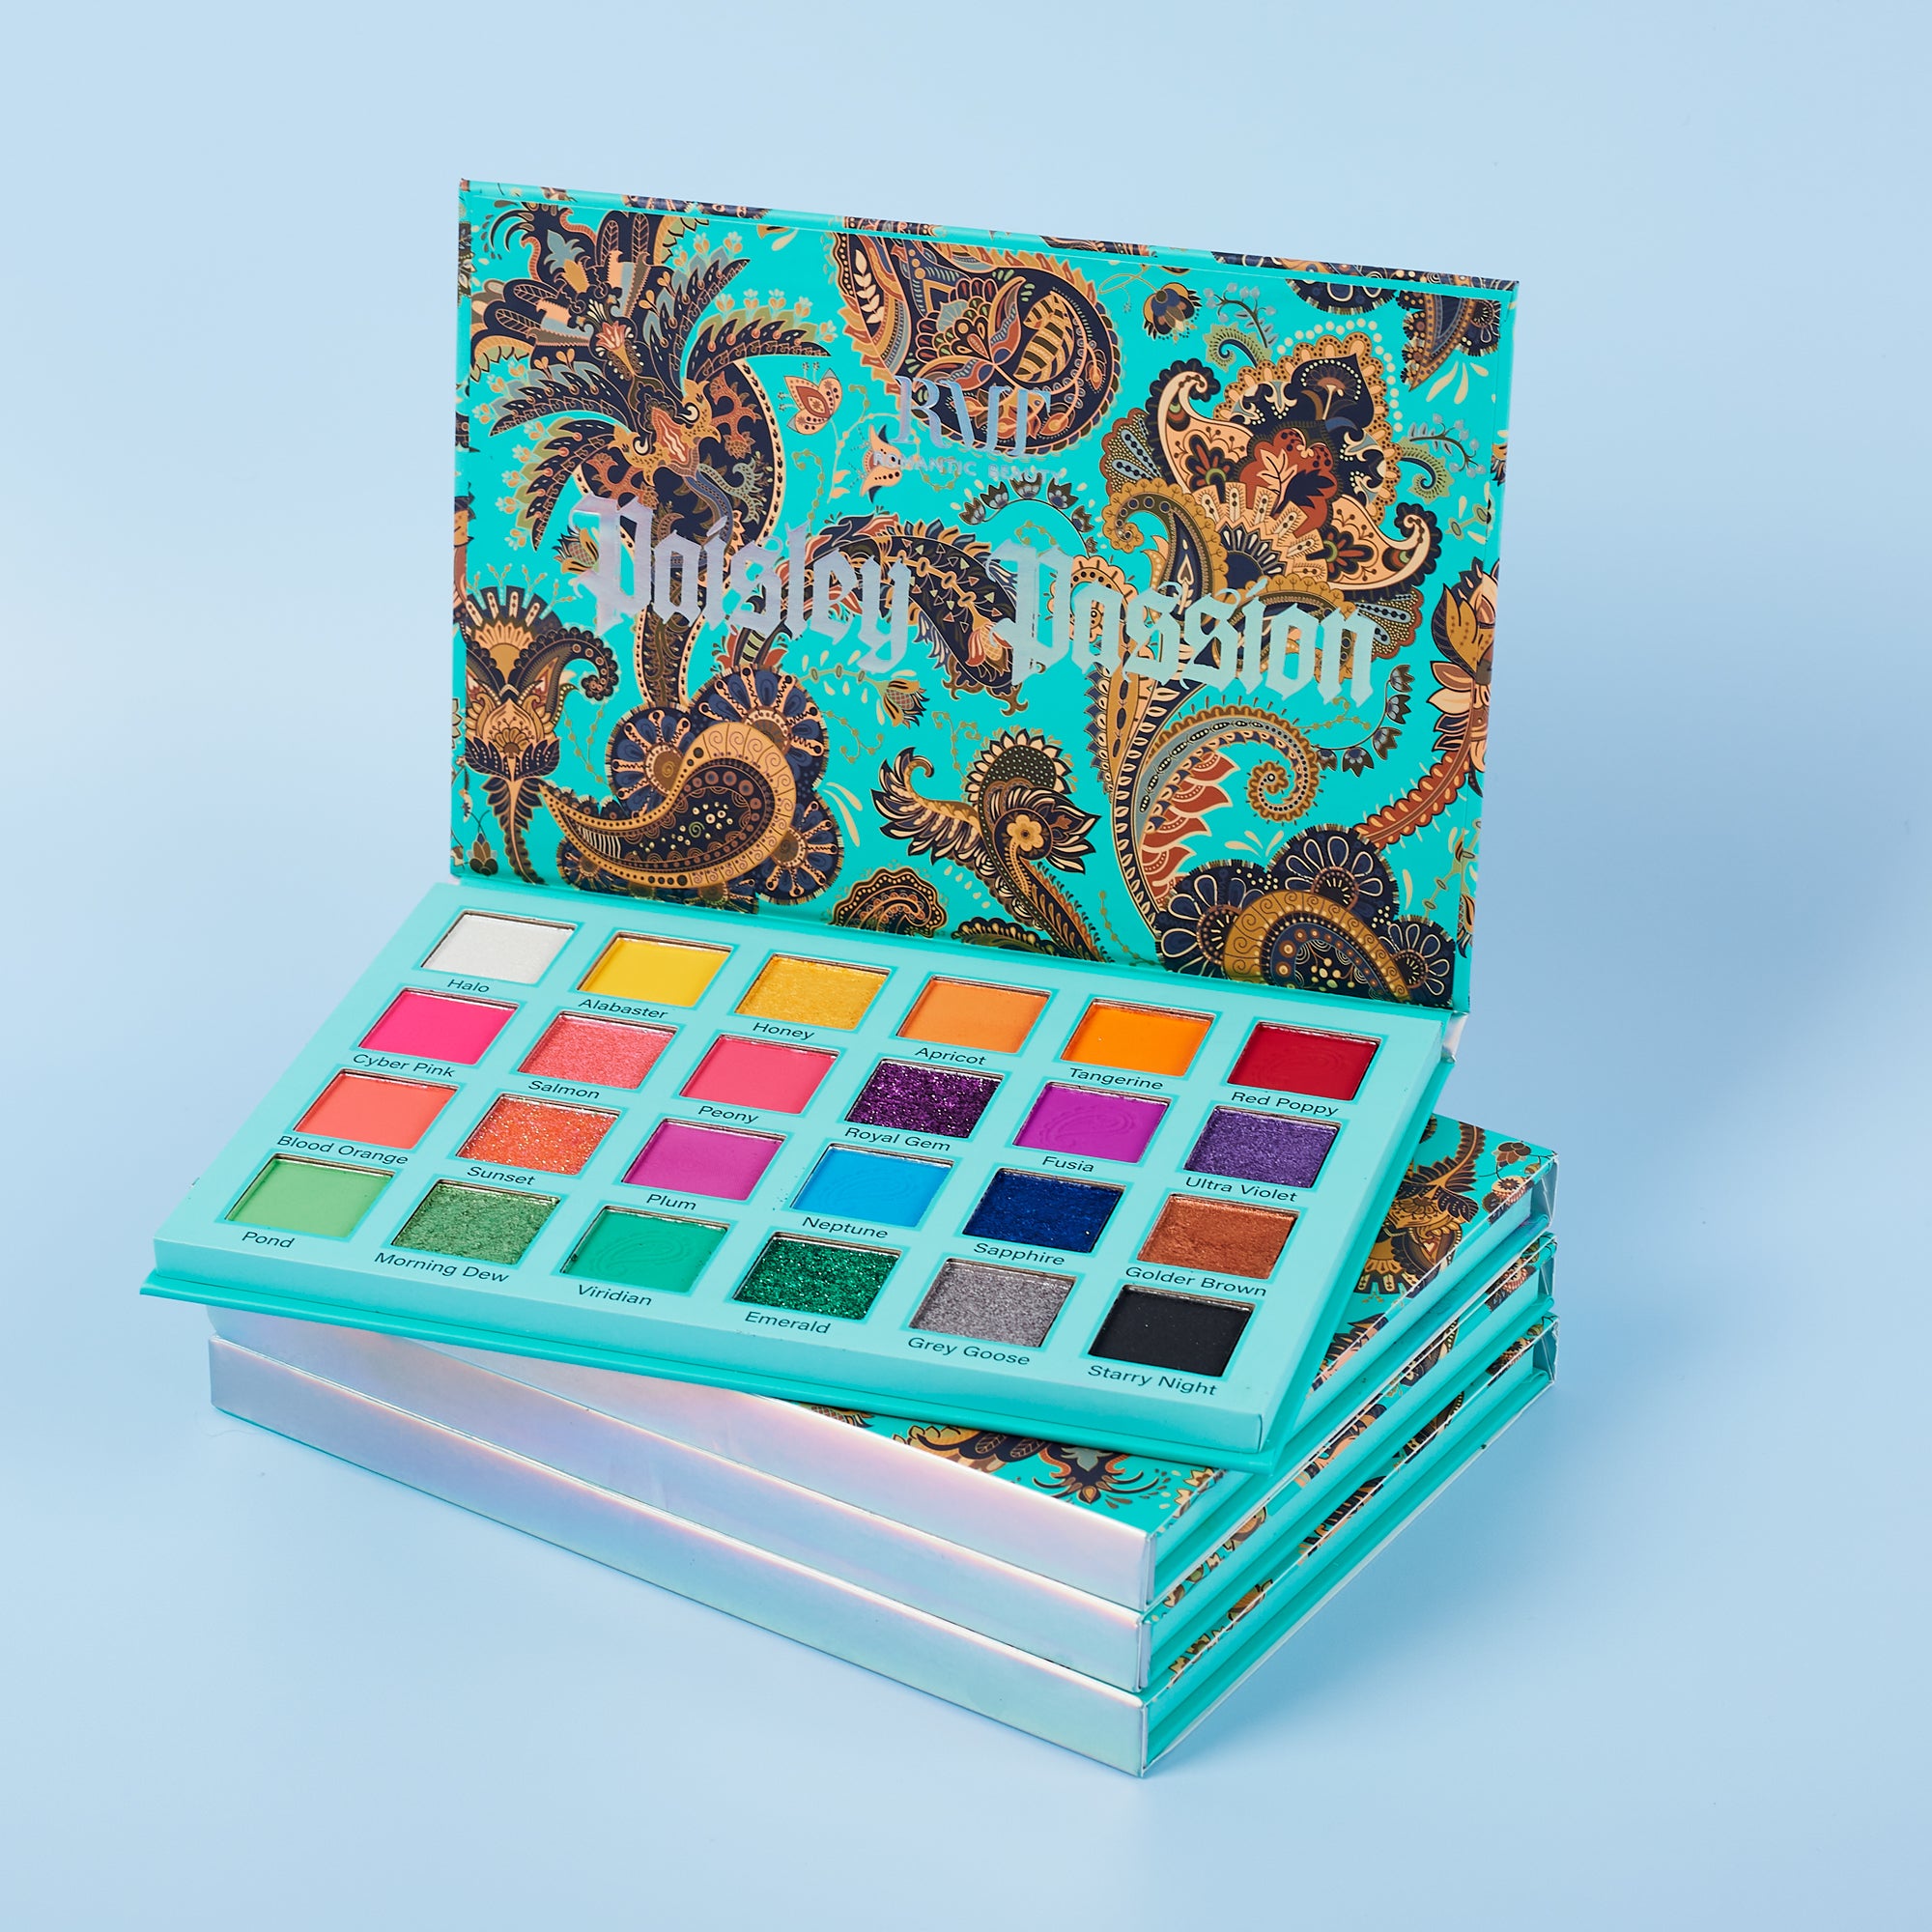 Paisley Passion-24 Color Eyeshadow